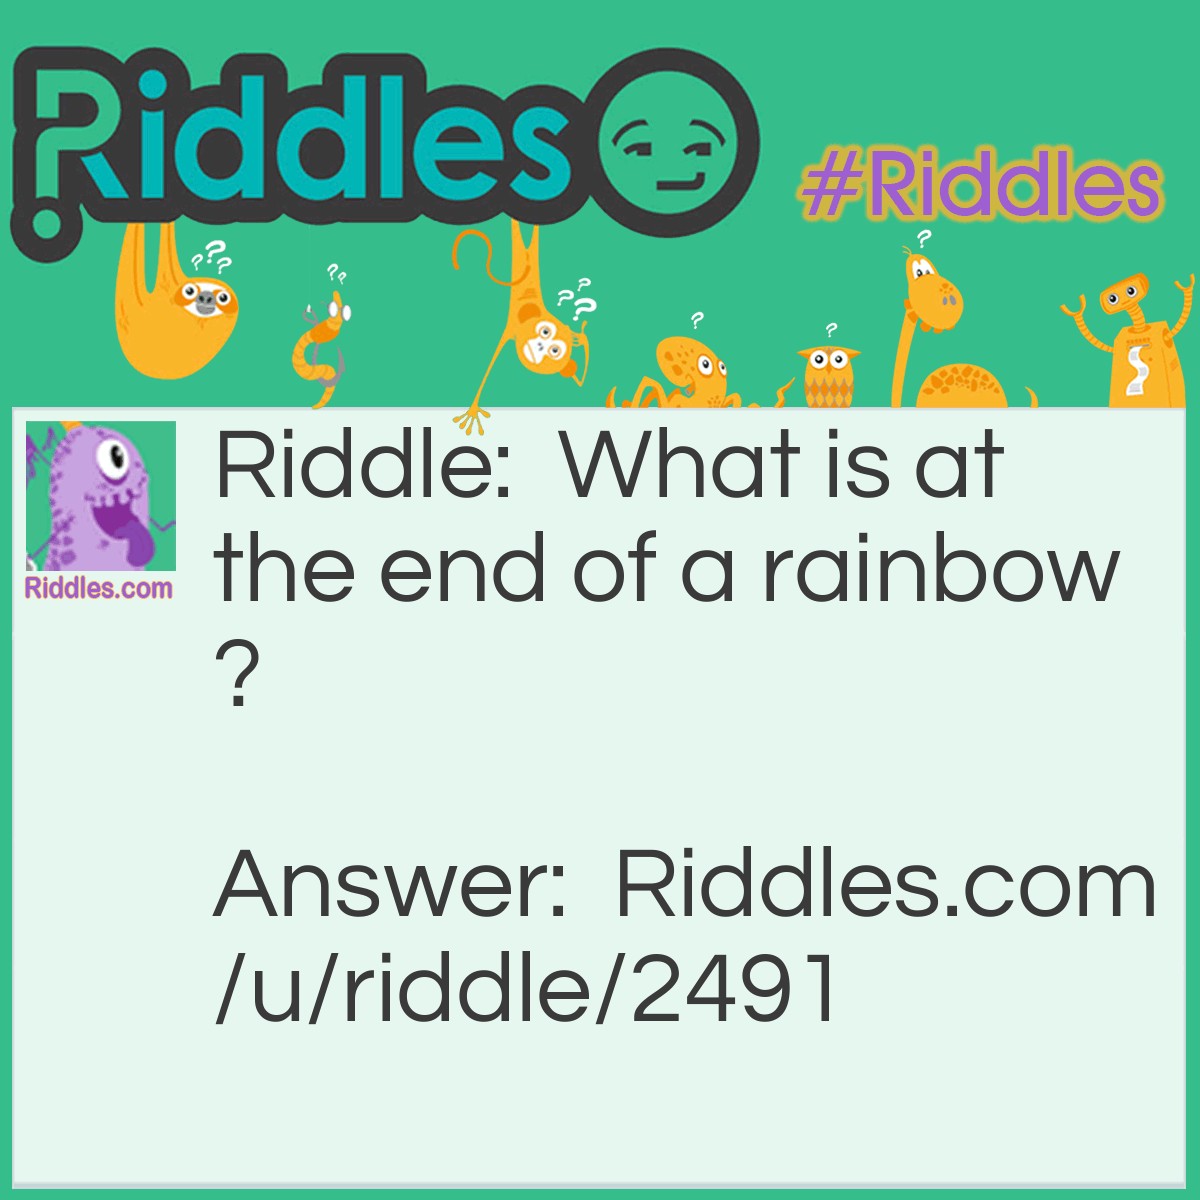 Riddle: What is at the end of a rainbow? Answer: A "w".